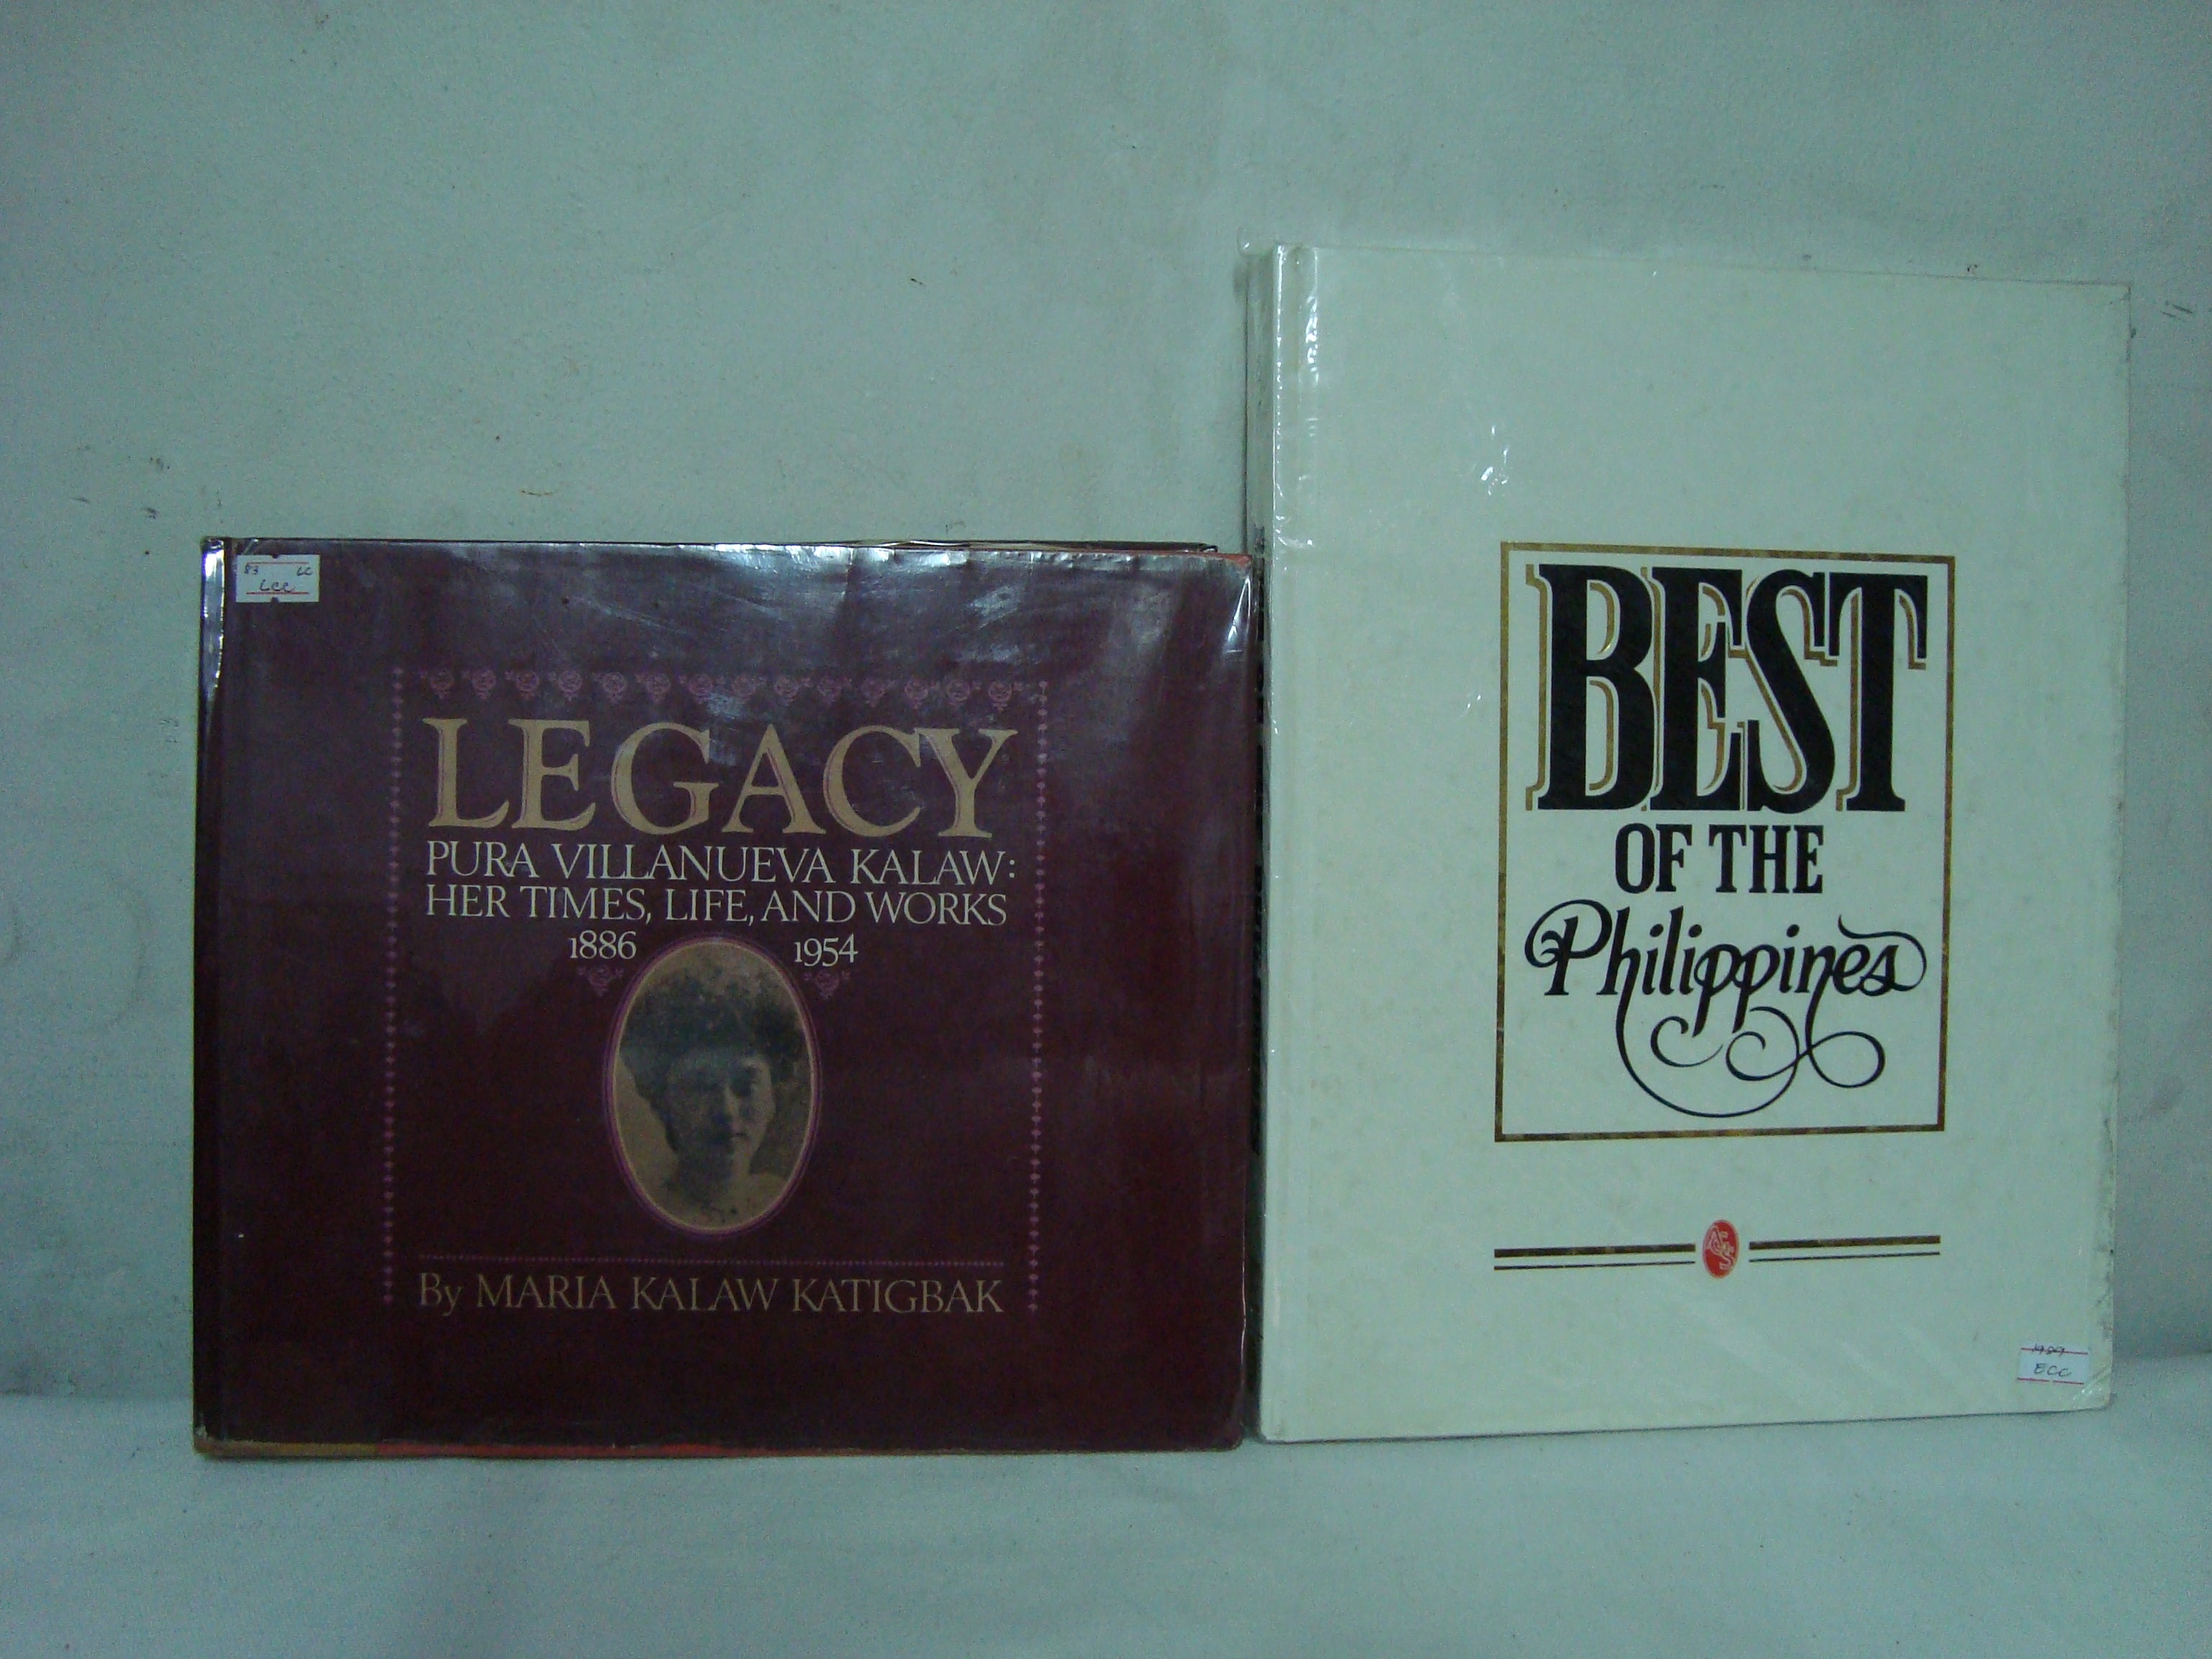 Legacy & Best of the Philippines